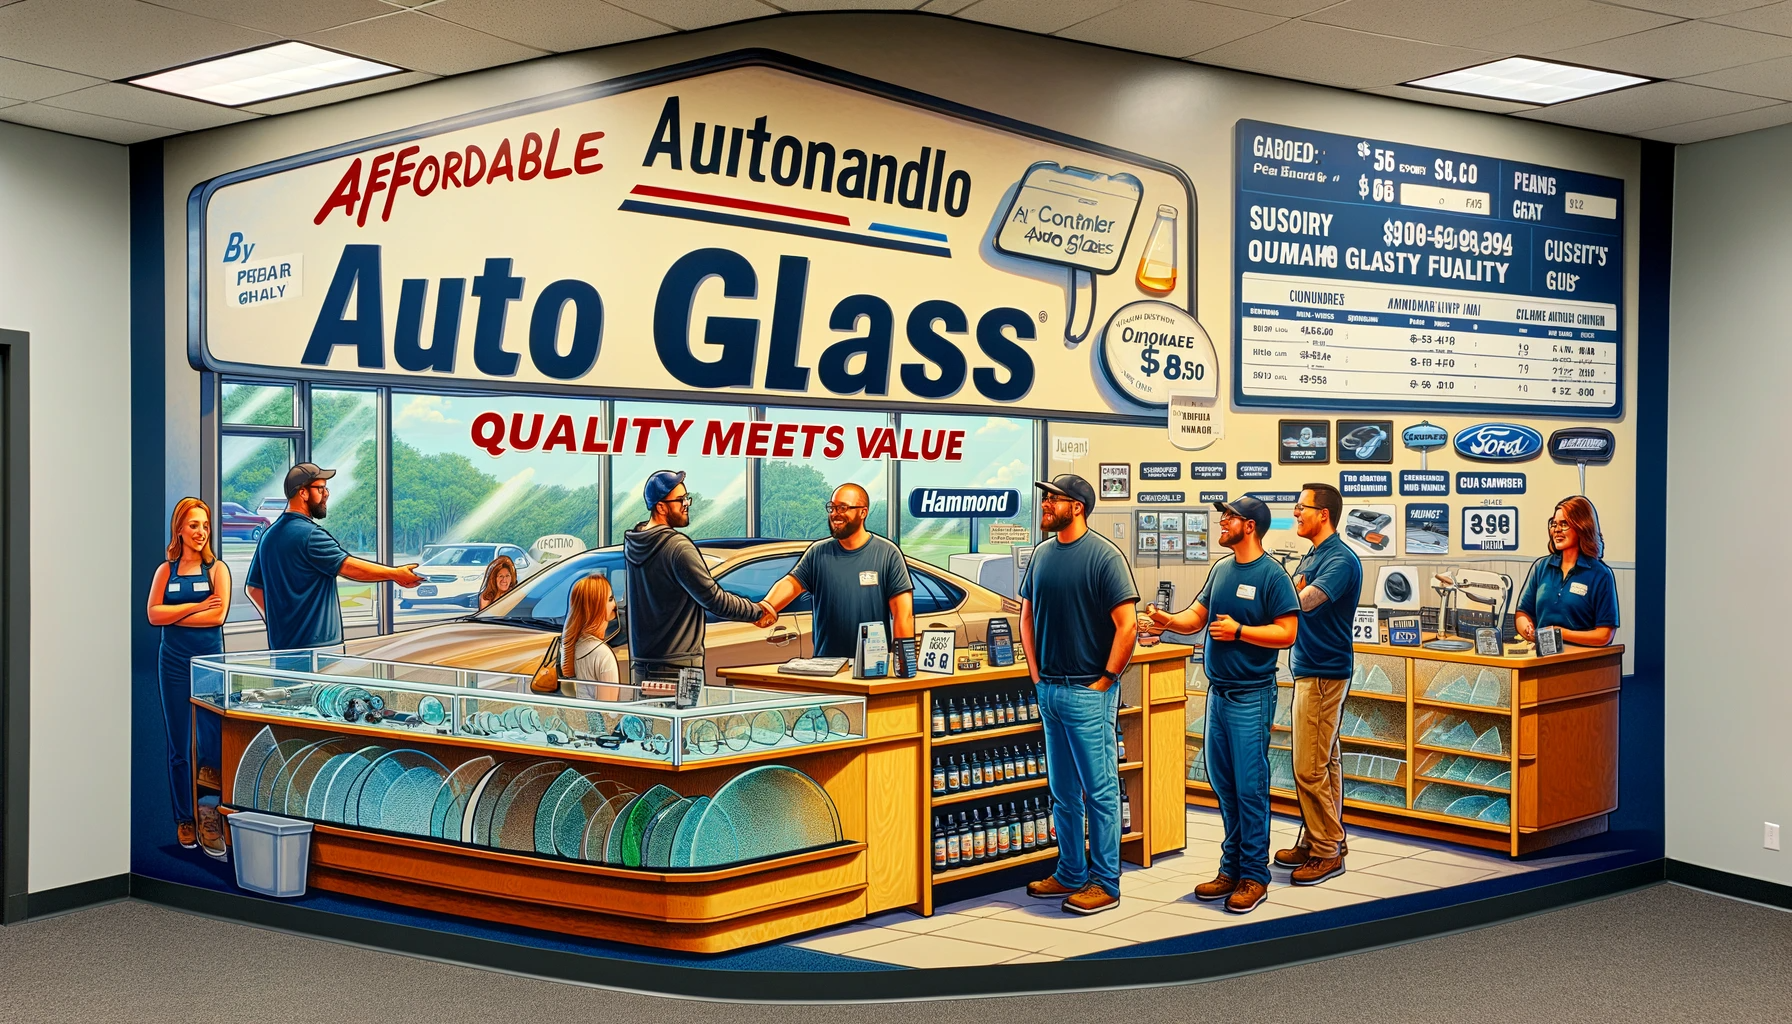 Interior of a customer-centric auto glass shop in Hammond, showcasing affordability and quality. The scene includes customers interacting with friendly staff, a variety of auto glass on display, and visible pricing details. The shop is neat, organized, and inviting, with a prominent sign reading 'Affordable Auto Glass Solutions: Quality Meets Value'.